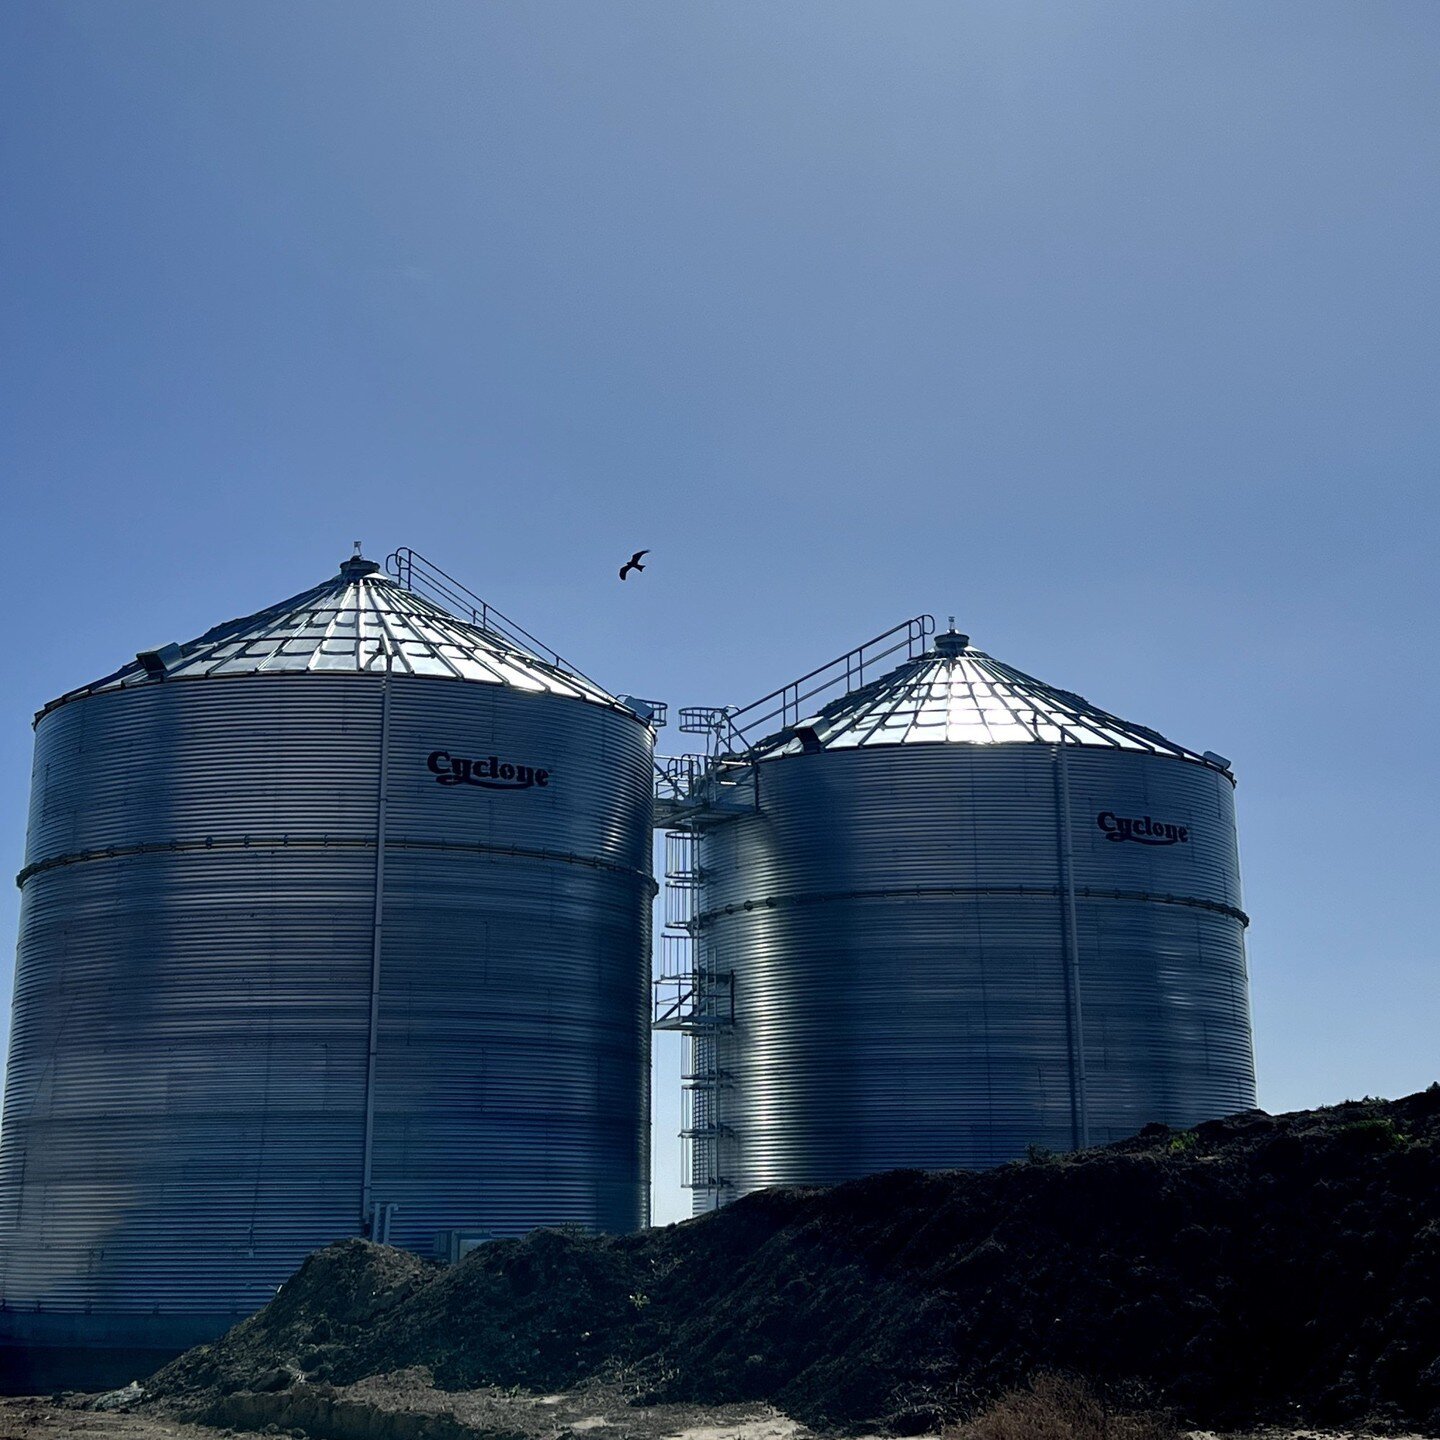 Silos... hundreds of thousands of kilo's (and dollars) worth of product that we've found is prime target for thieves and pests... simply sorted with a single Land Watch self install system. Check out our website for simple solutions to targeted areas